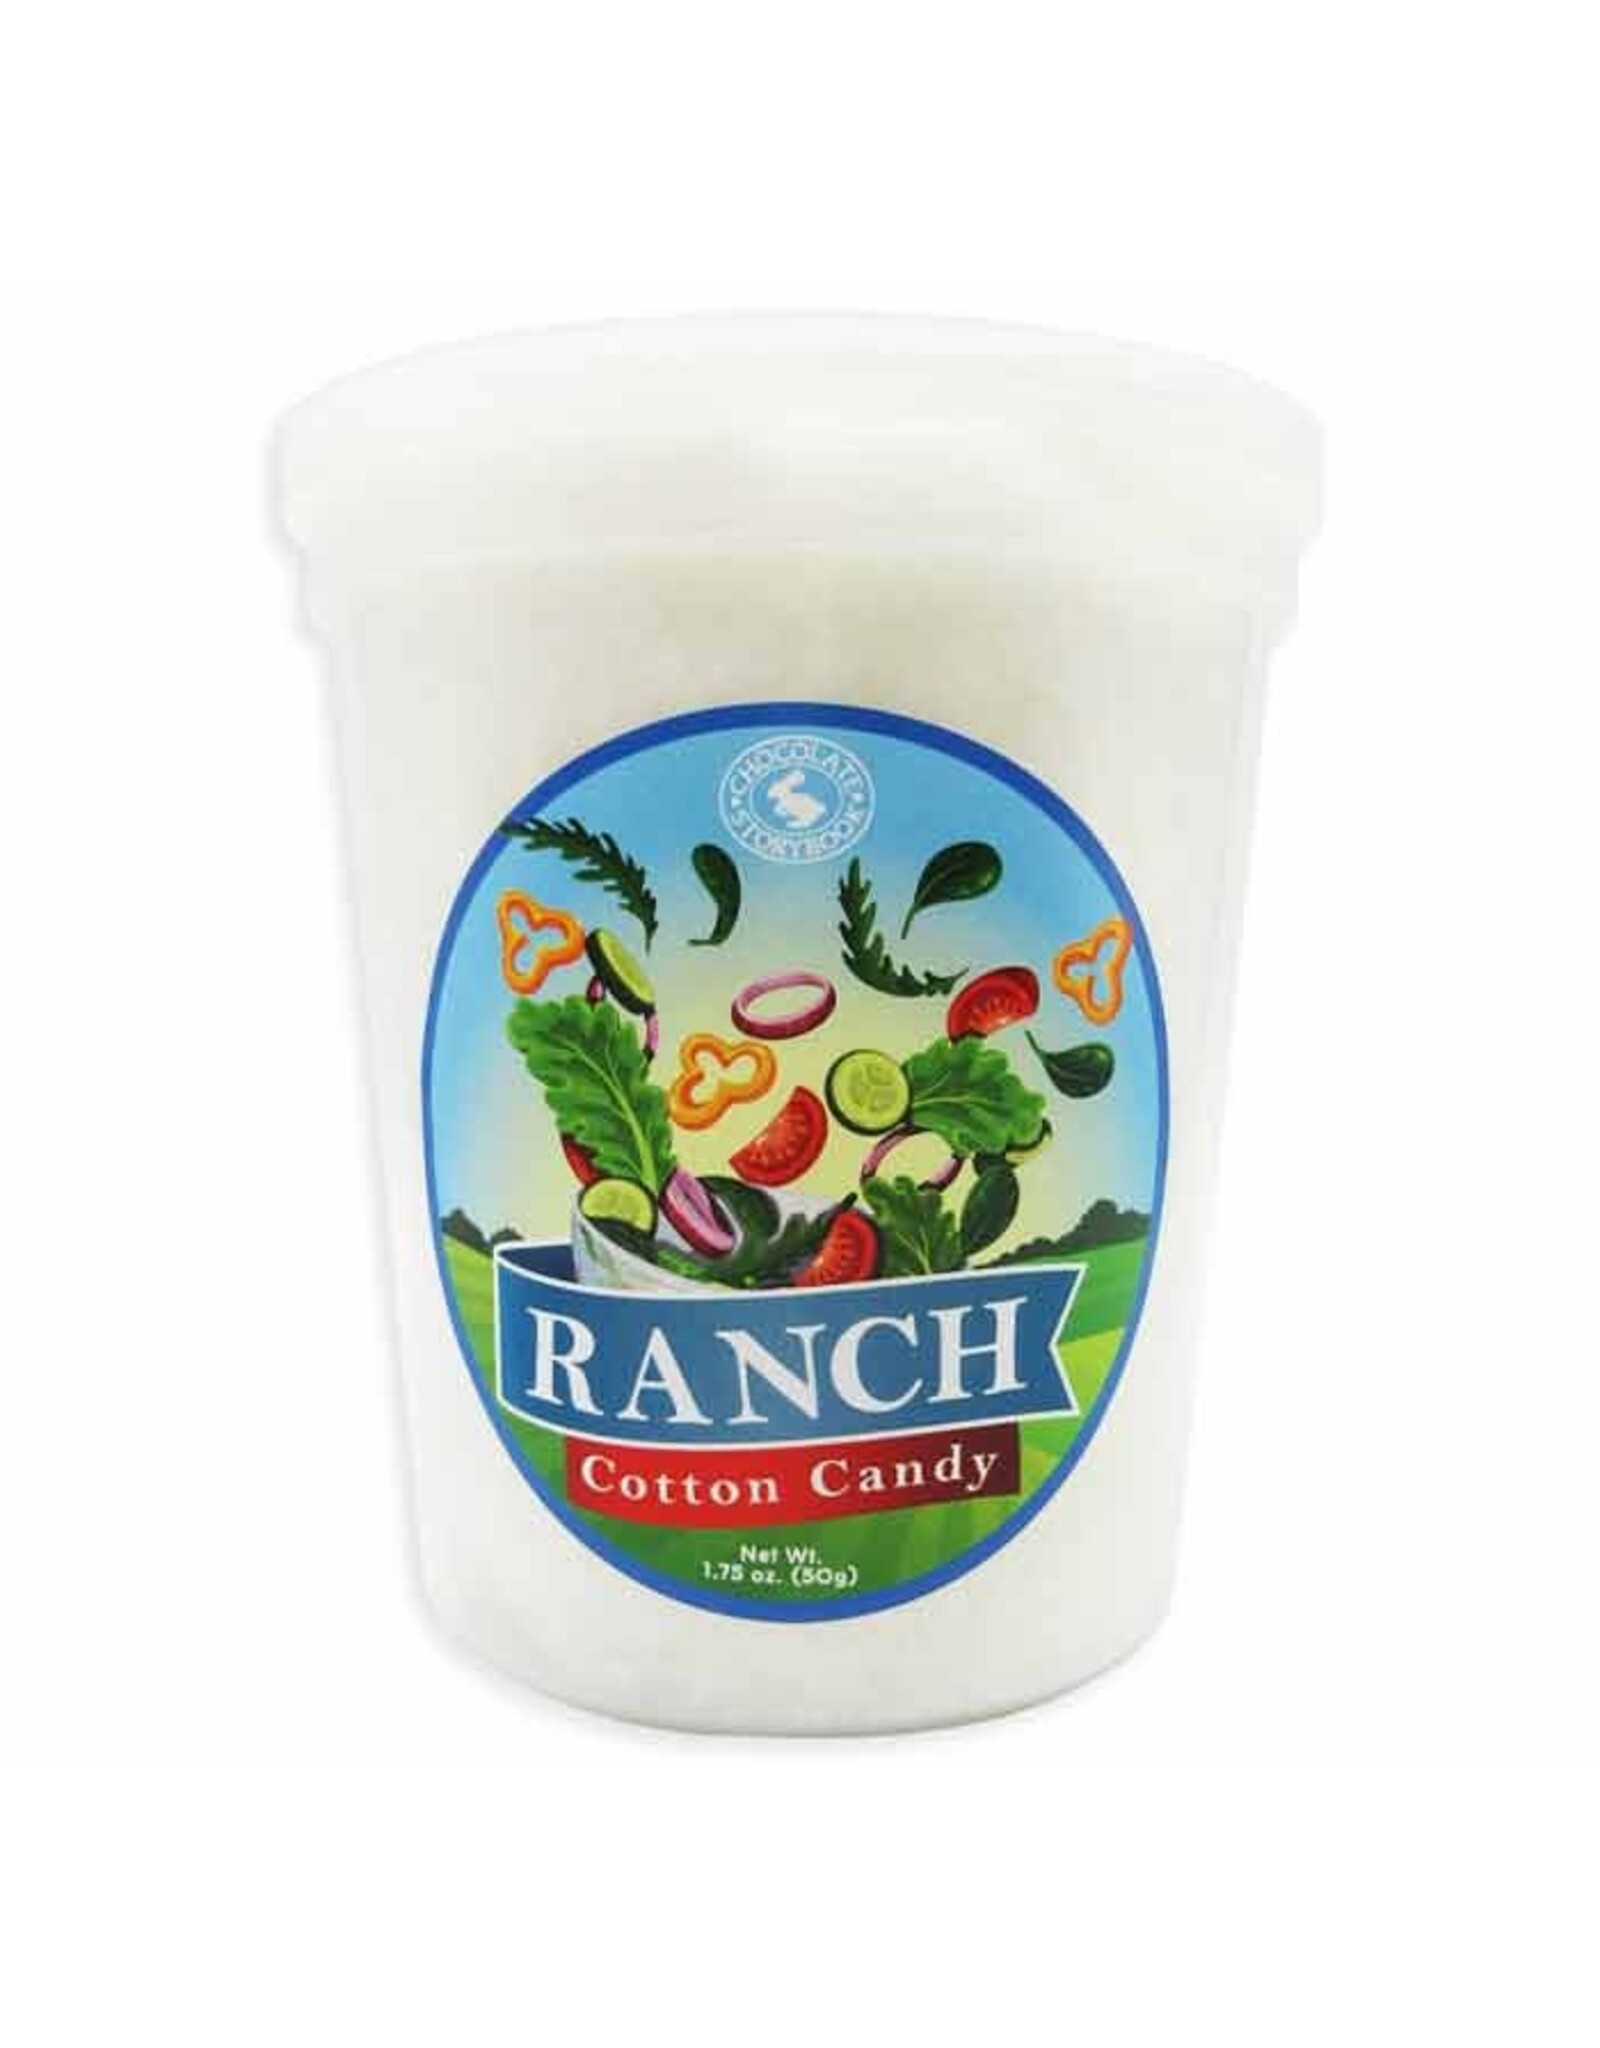 Chocolate Storybook Cotton Candy - Ranch Dressing Tub